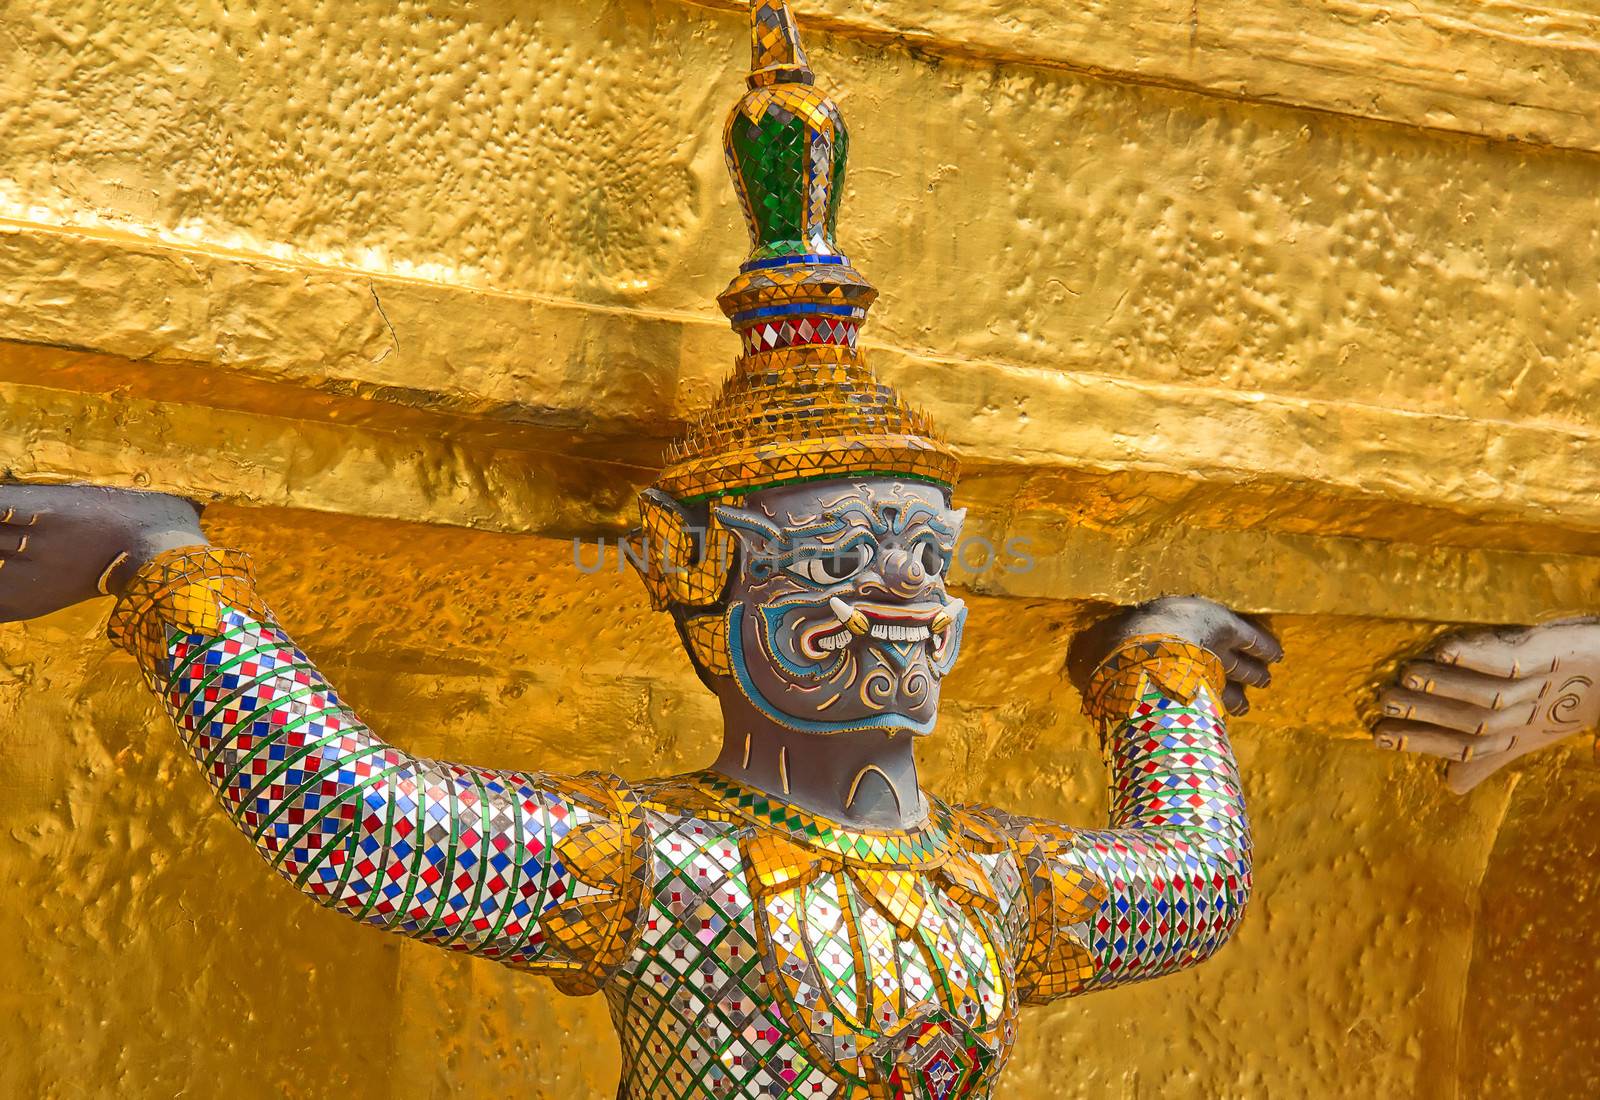 Elements of the decorations of the Grand Palace and Temple of Emerald Buddha in Bangkok, Thailand